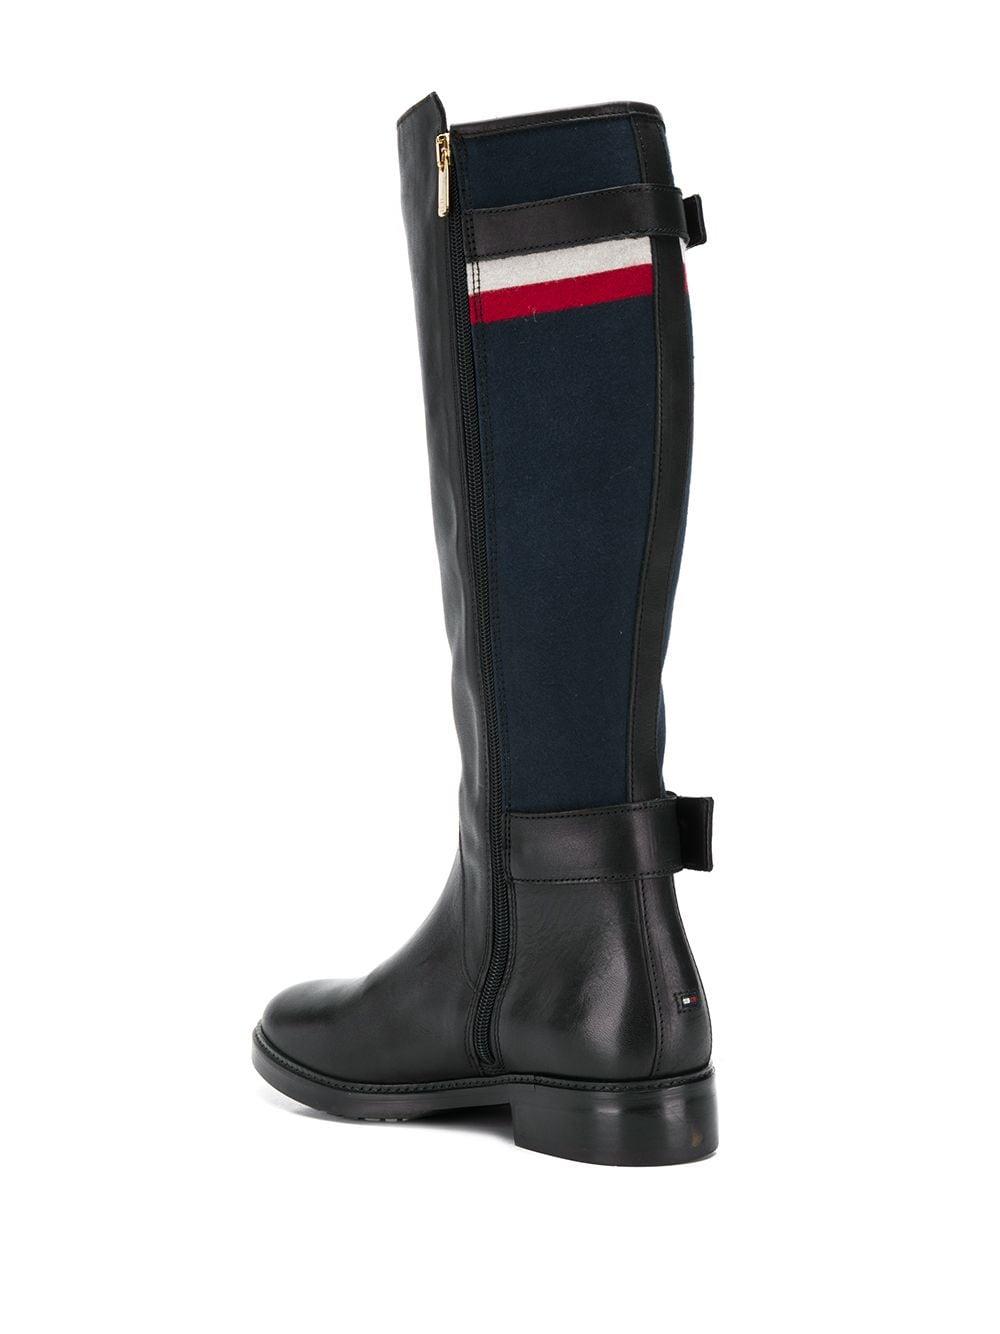 Tommy Hilfiger Leather Blanket Detail Knee-high Boots in Black - Lyst